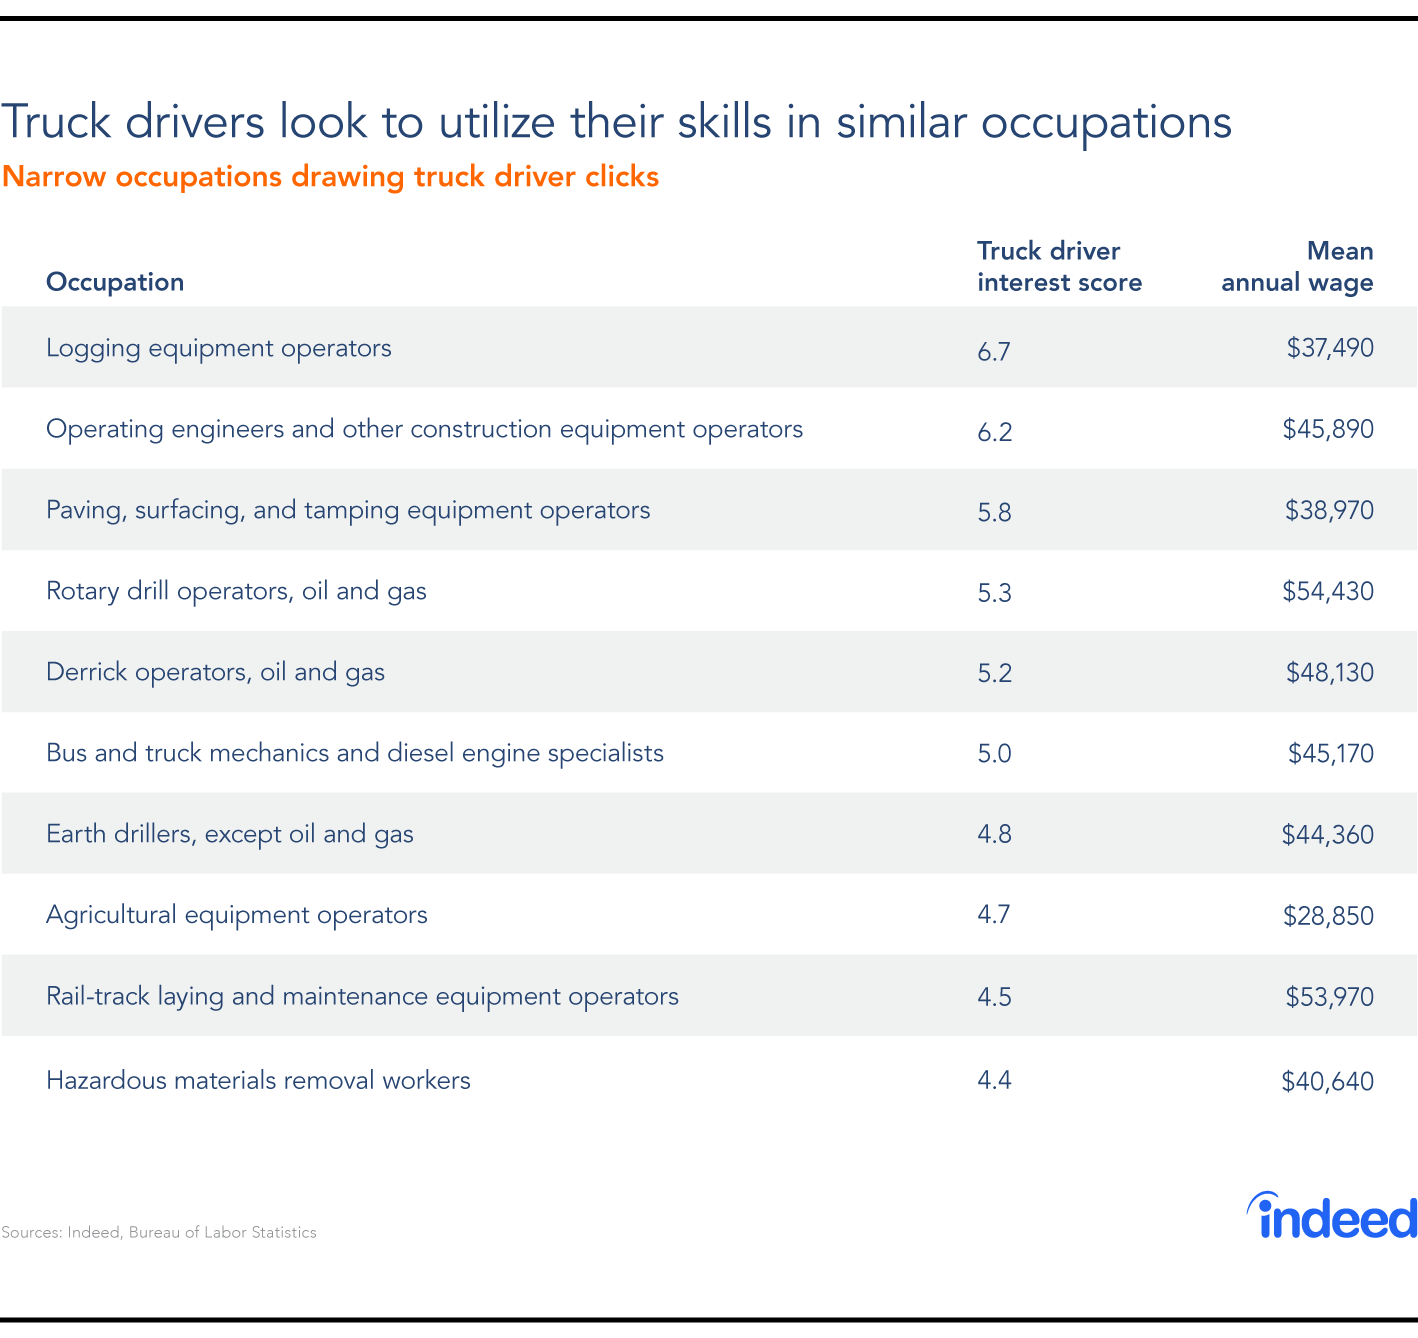 Truck drivers look to utilize their skills in similar occupations